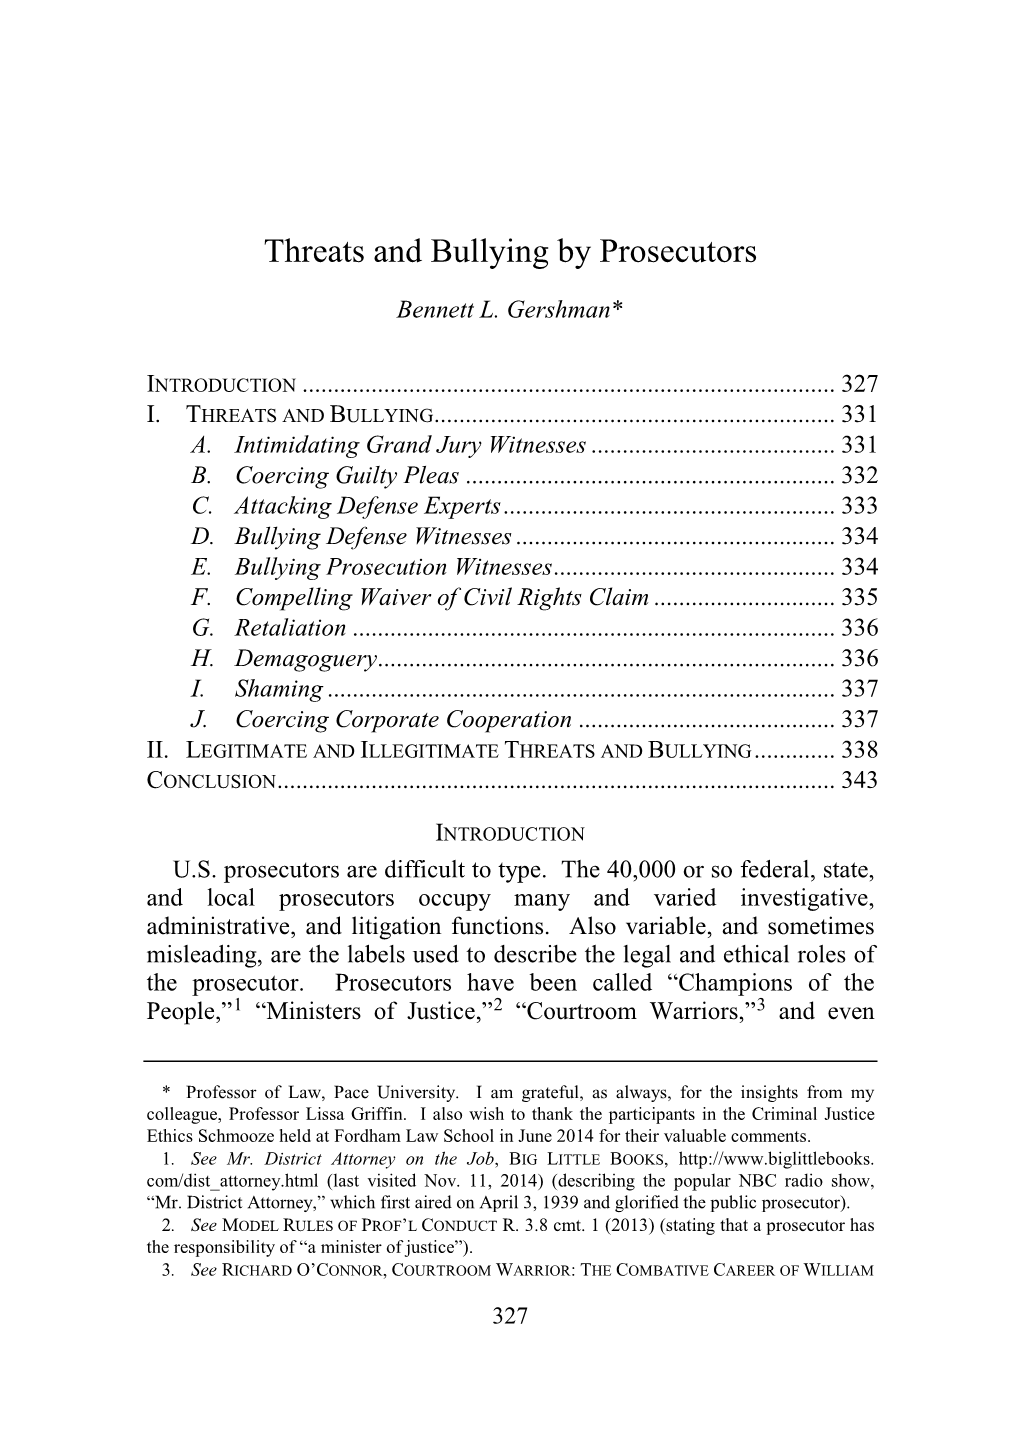 Threats and Bullying by Prosecutors